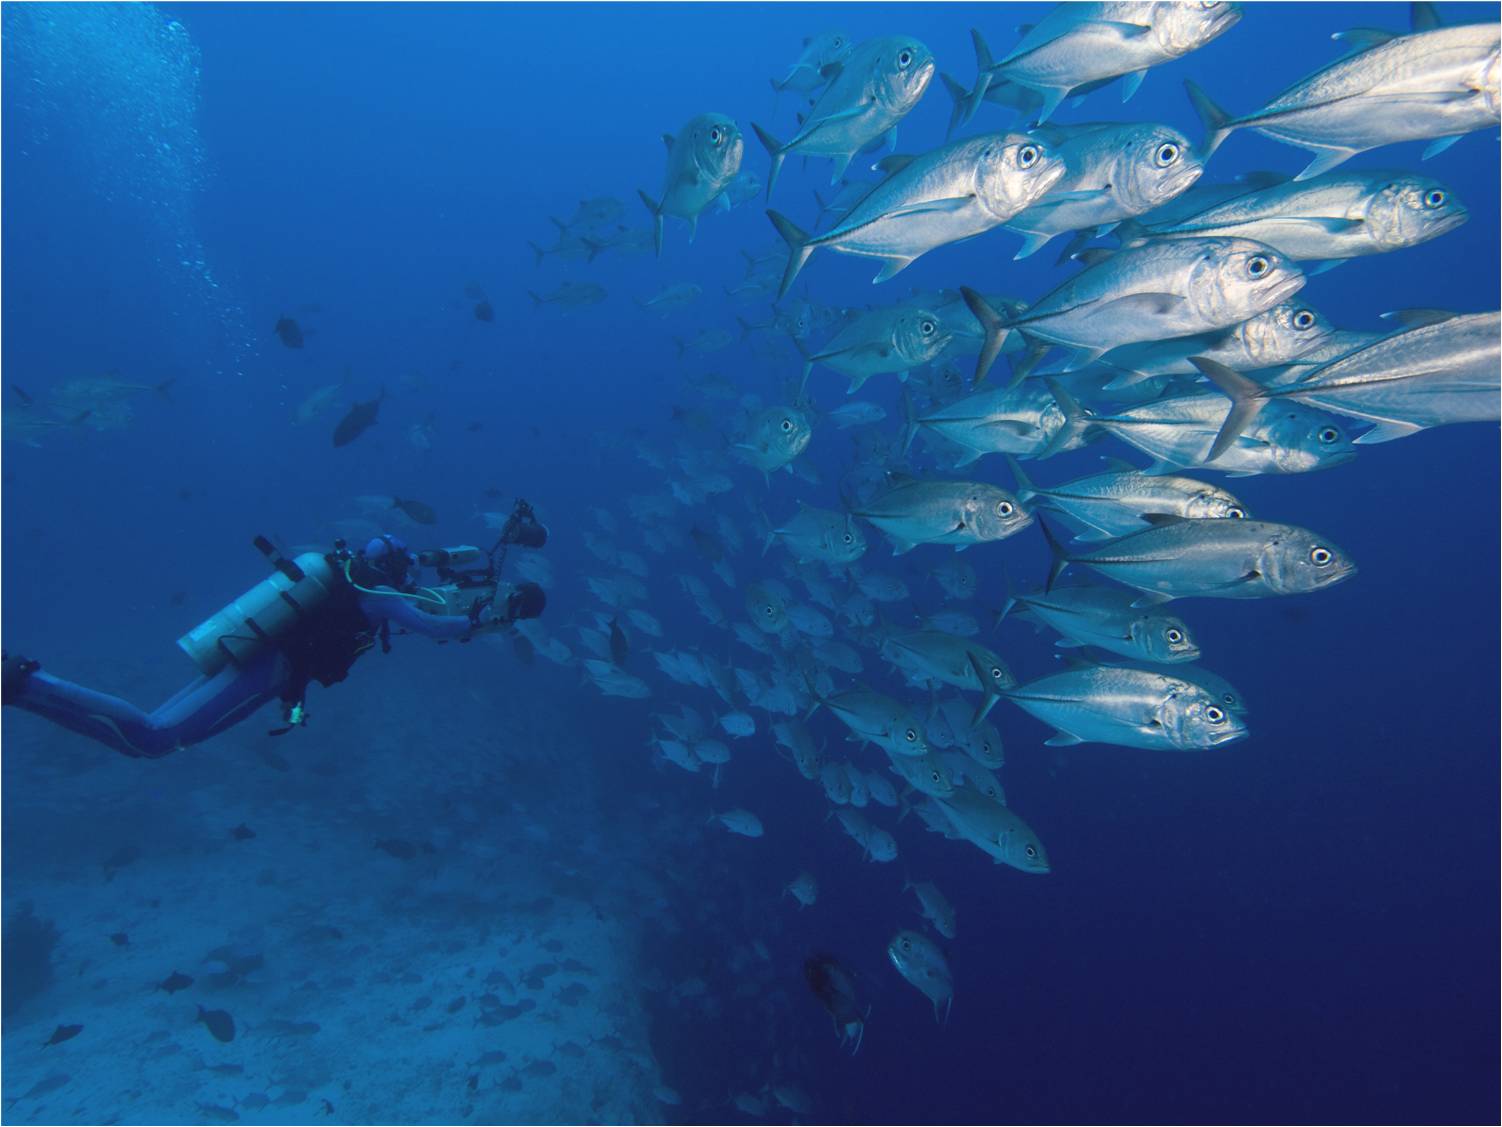 A diver swimming among Trevally fish.